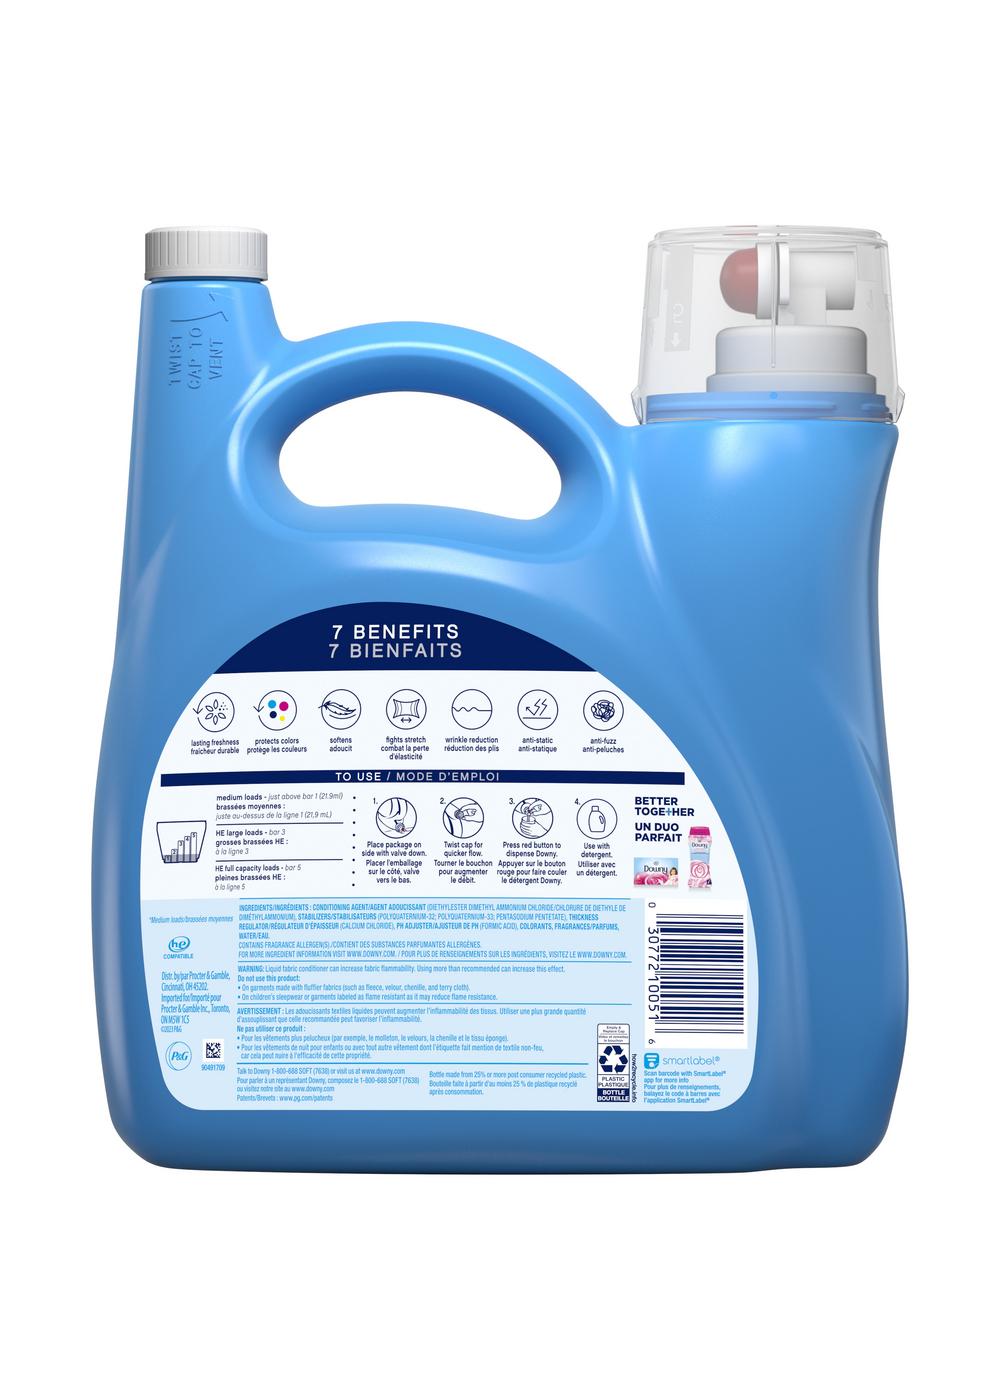 Downy Fabric Softener, April Fresh, 190 Loads as low as $9.08